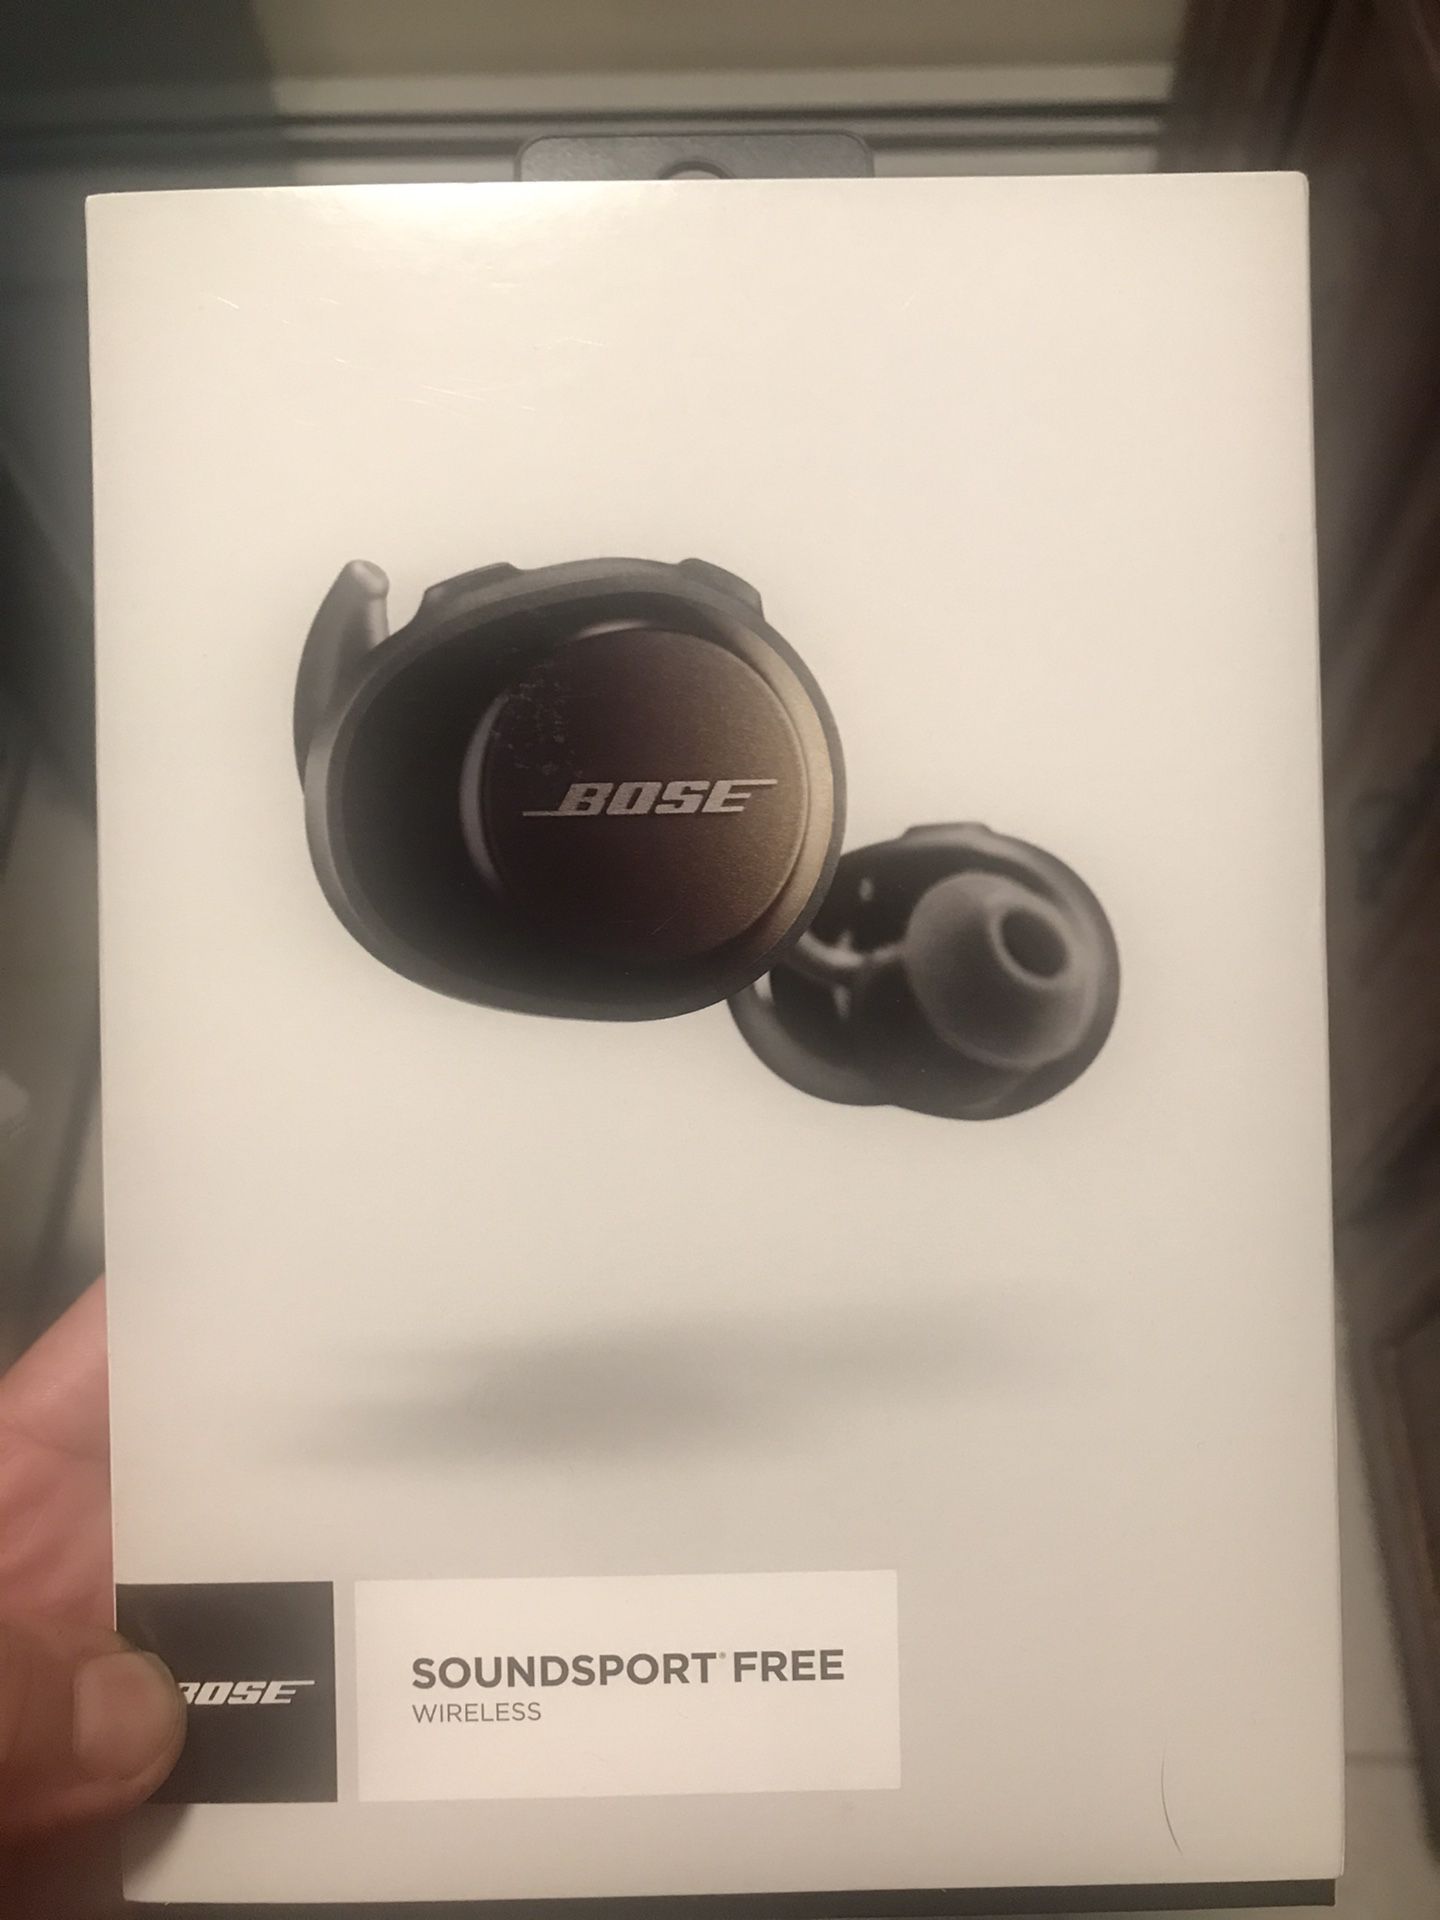 Soundsport free wireless headphones with charger and extra earbuds